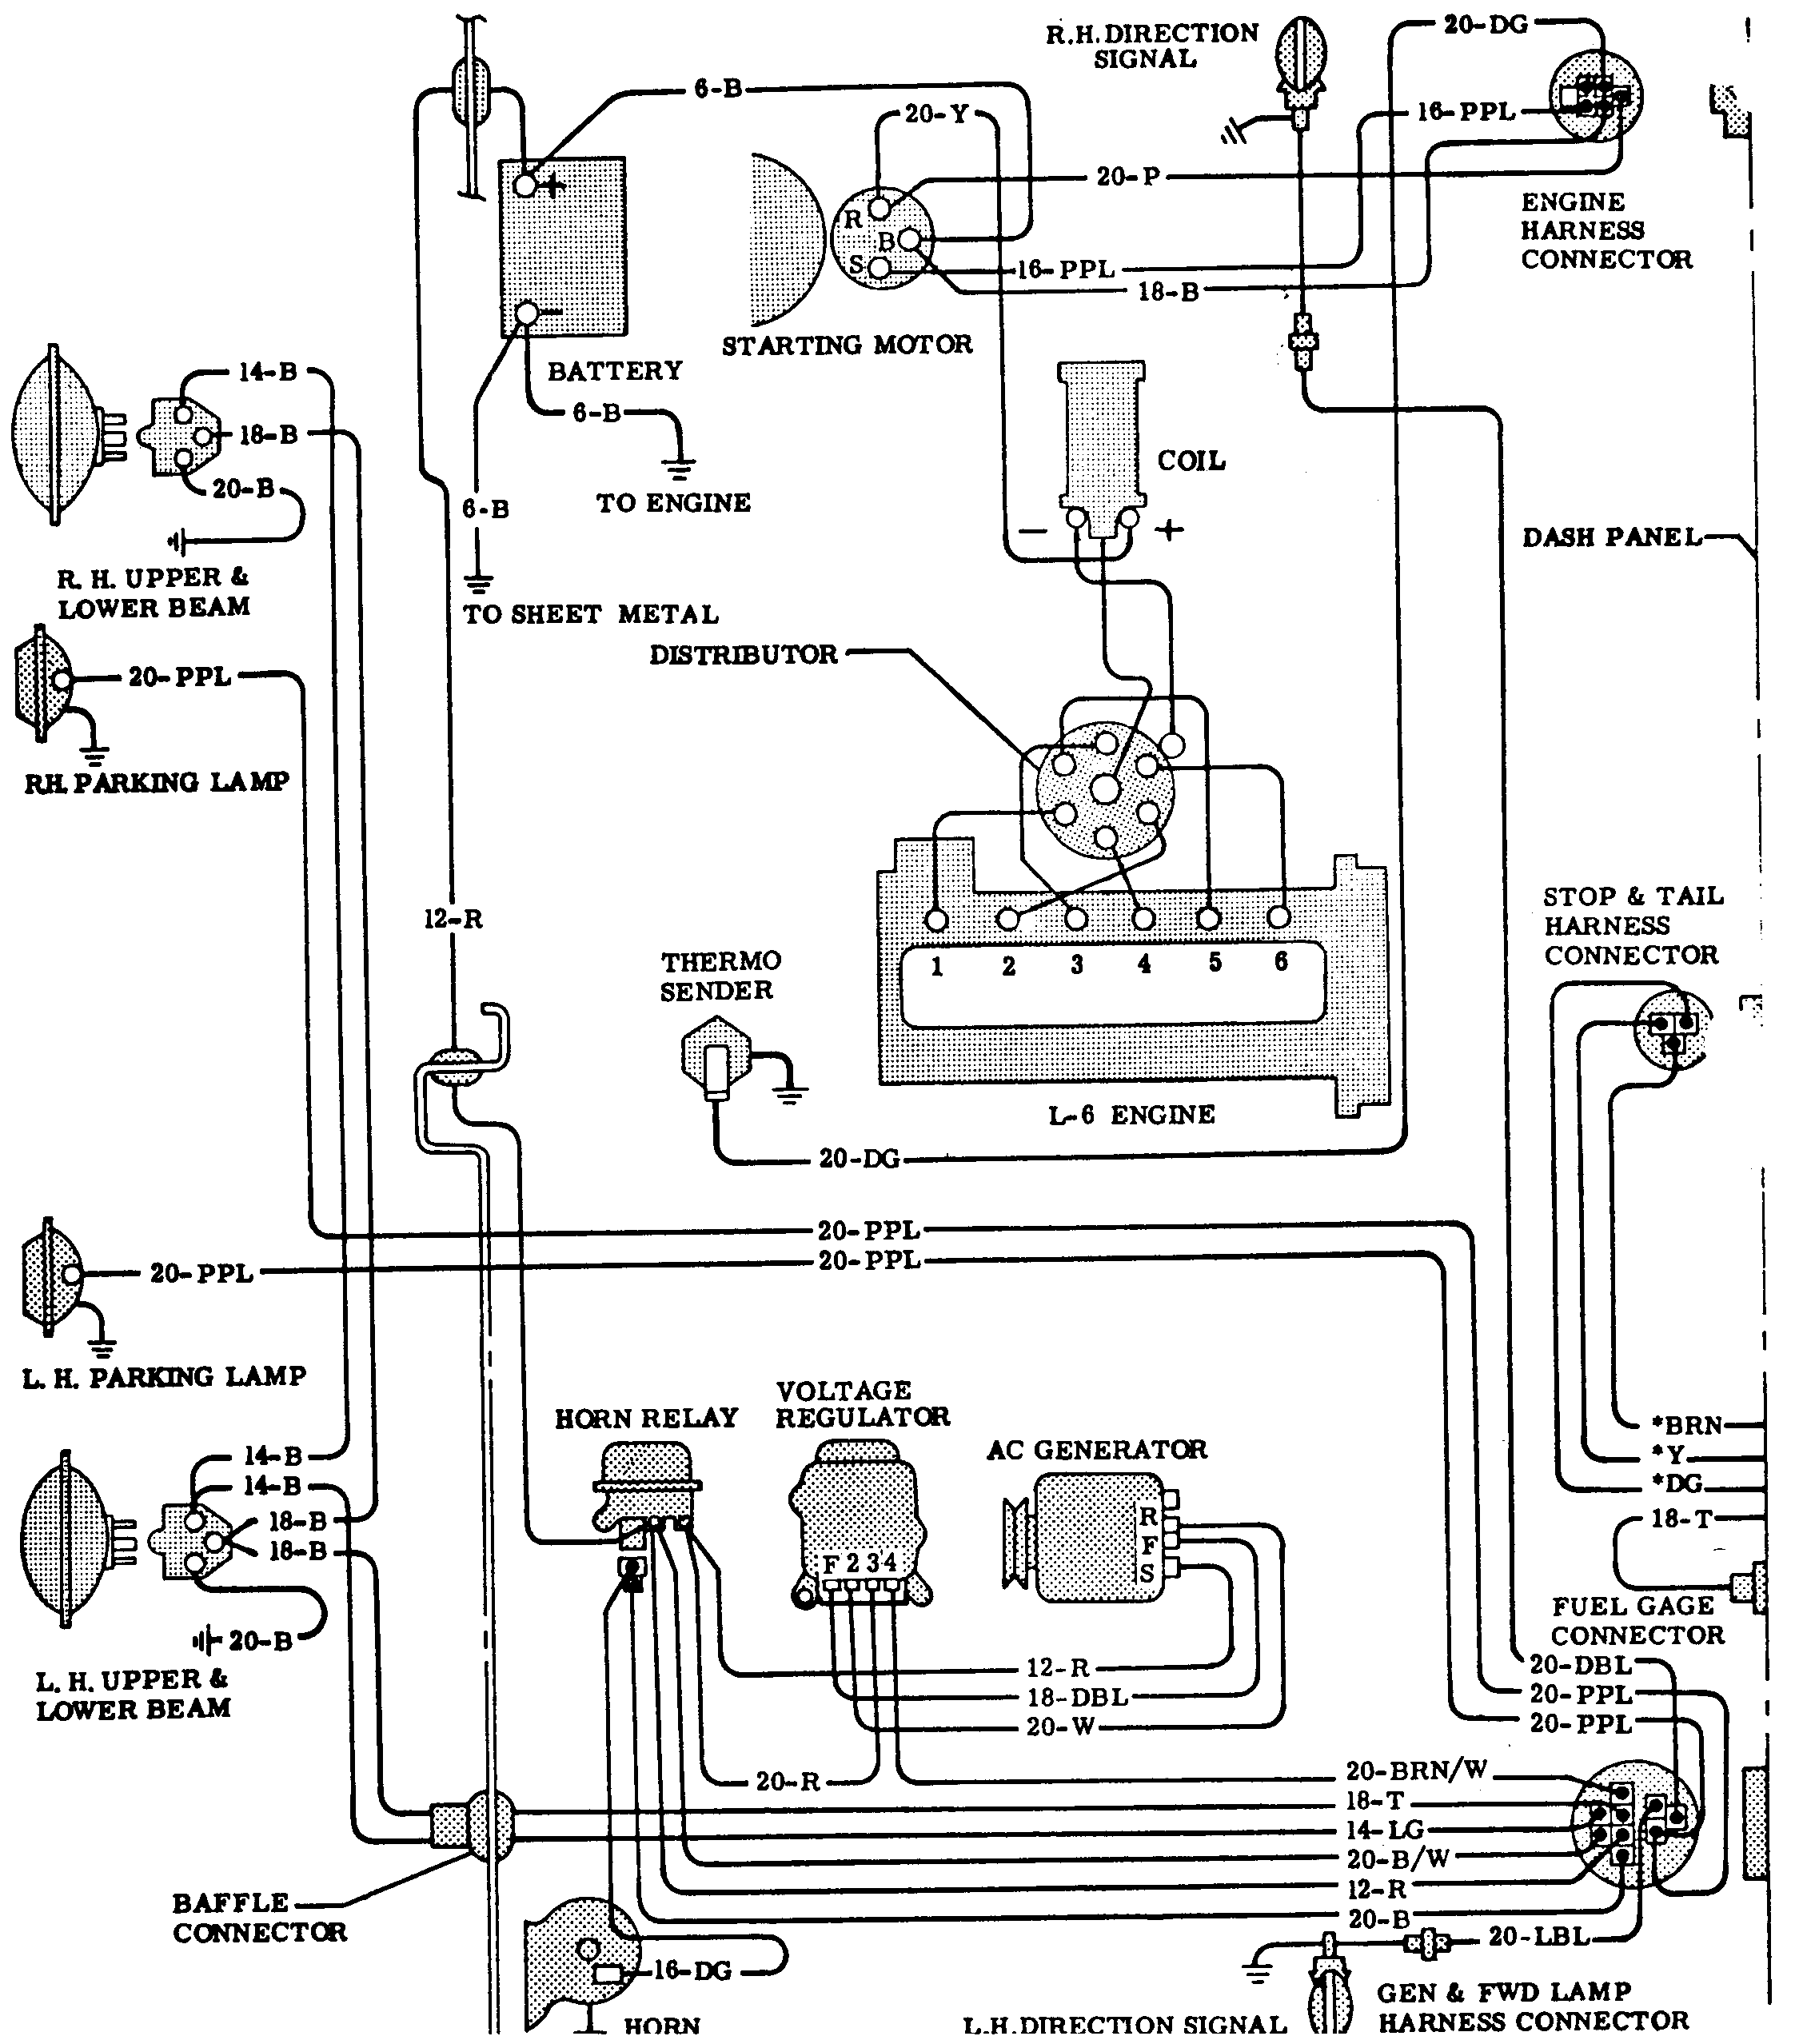 wiring diagram for c60 ign switch